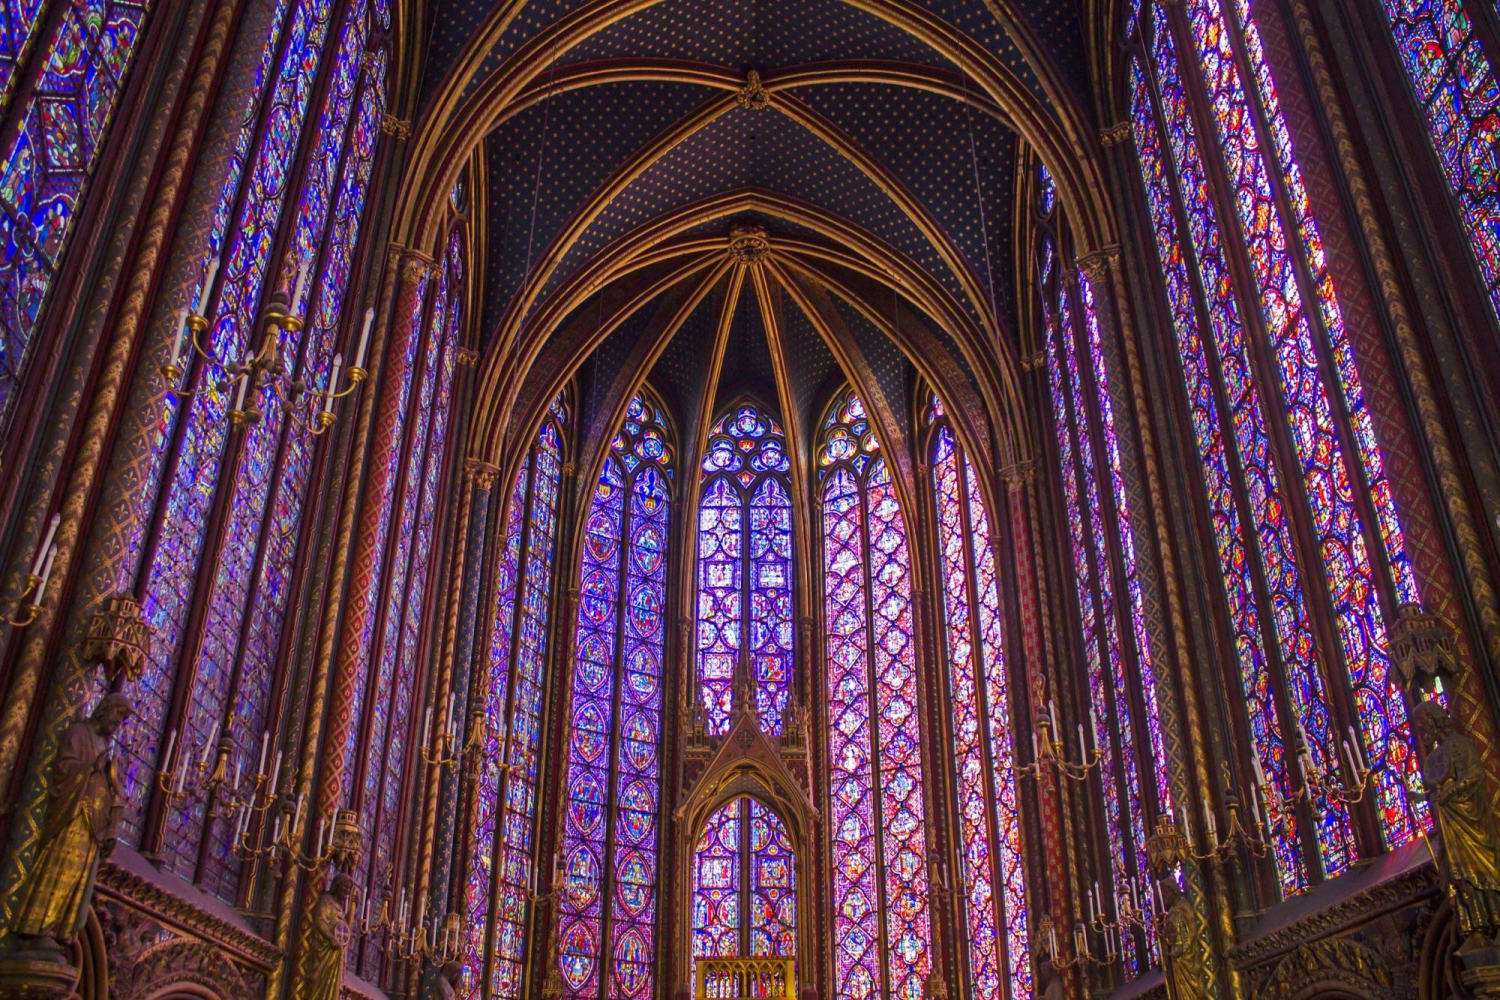 The reliquary platform of Sainte-Chapelle in Paris, surrounded by curtains of Medieval stained glass, built to hold the maybe-real Crown of Thorns (OC, Info in comments)